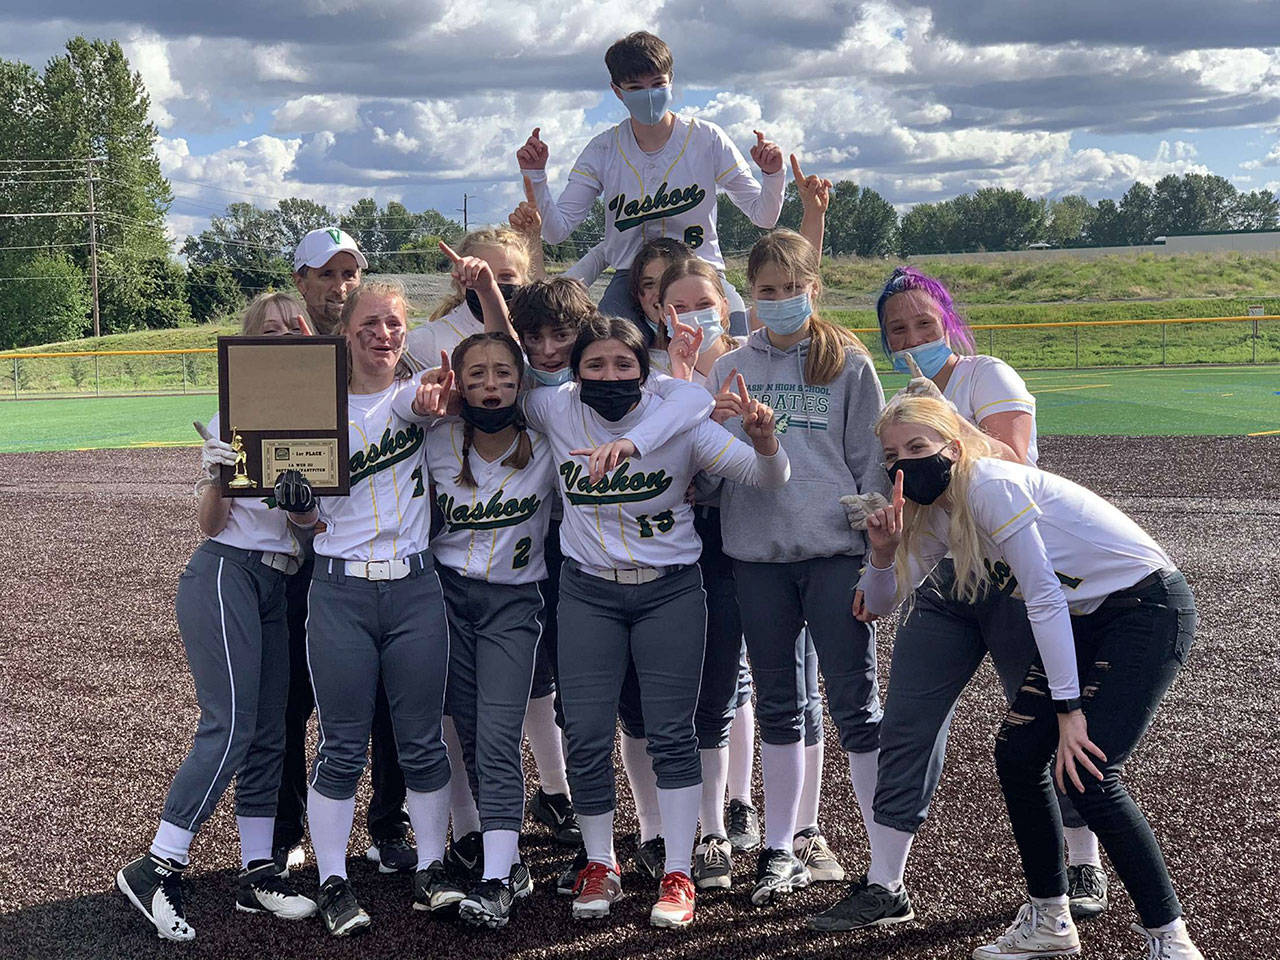 The VHS Pirates Fastpitch Softball team after their victory against Bellevue Christian last Sunday, May 9. The team finished with an overall record of 9-1 (6-0 league) (Courtesy Photo).